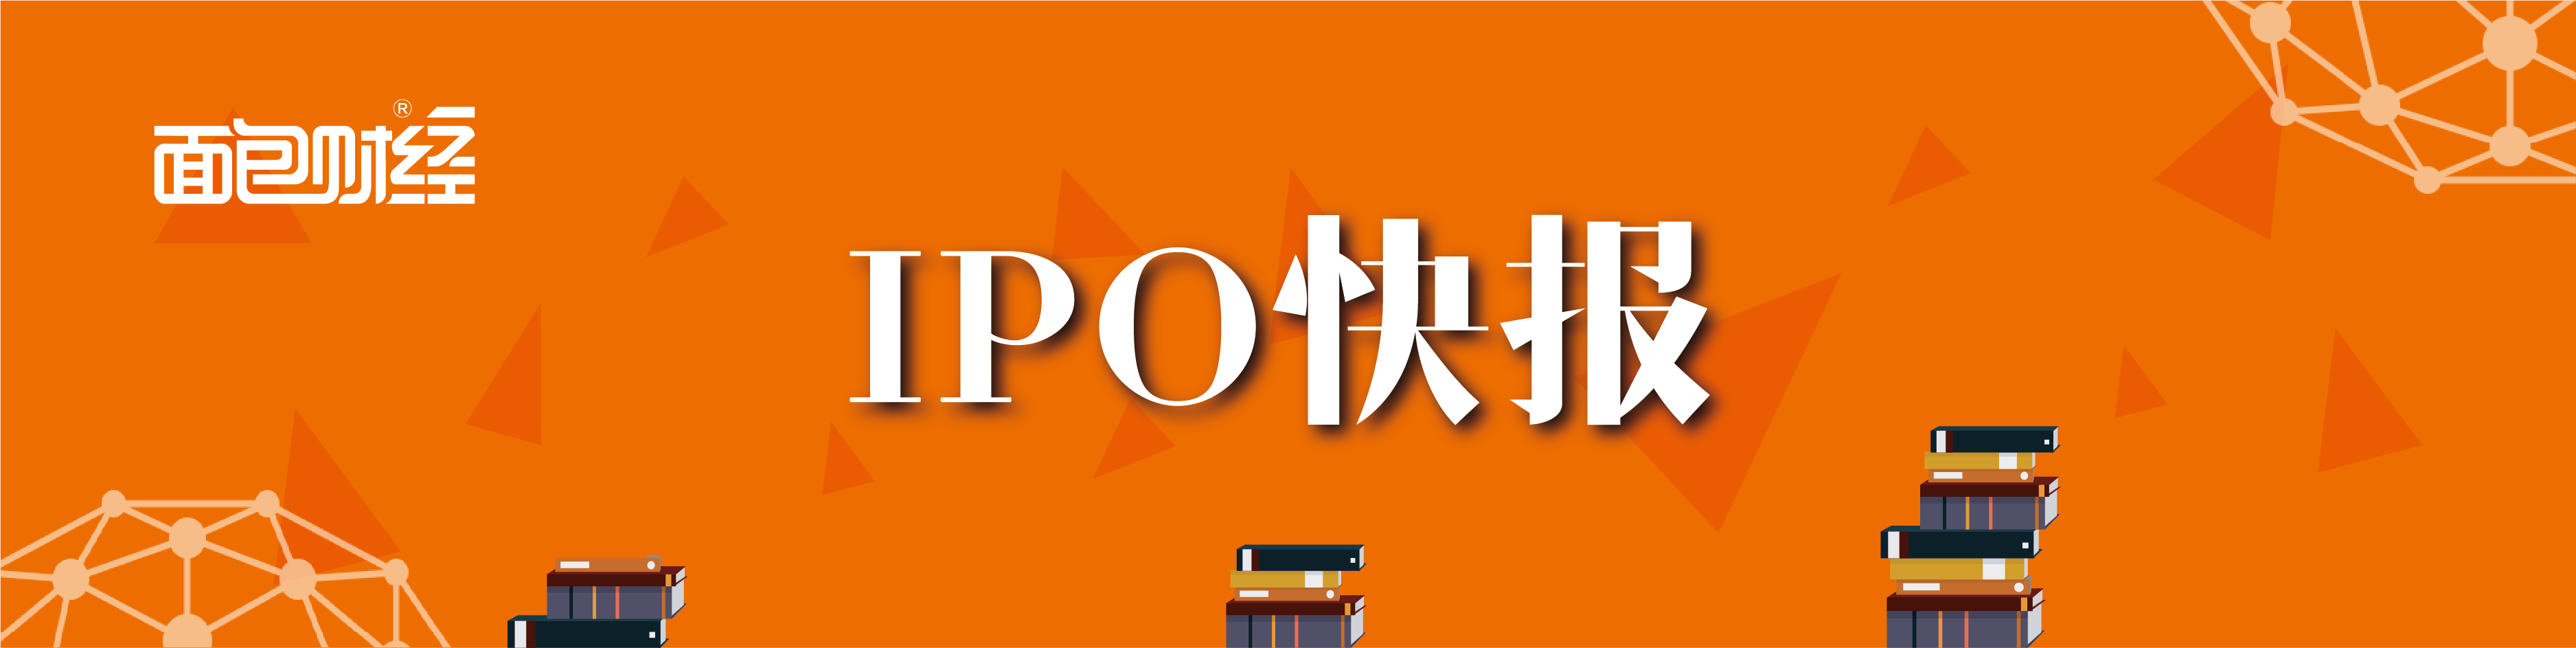 IPO快报长.png